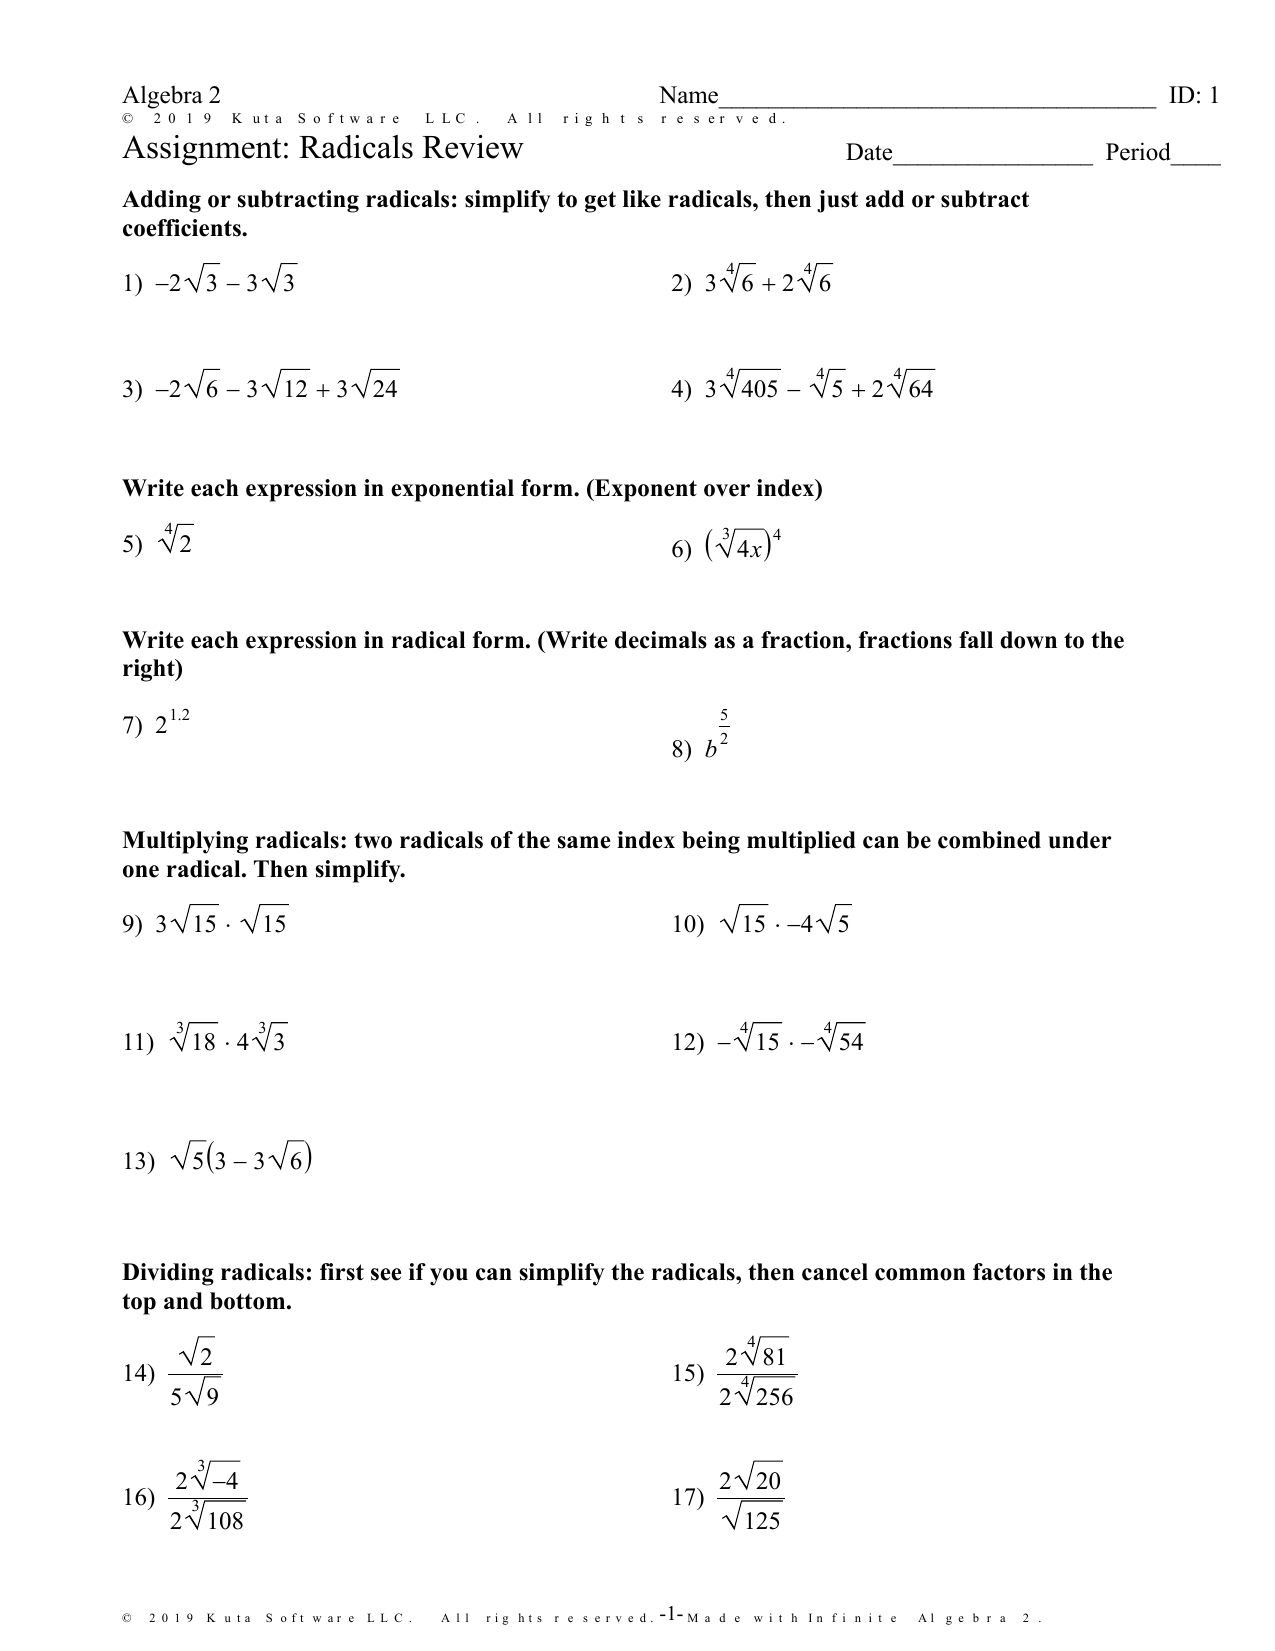 Radicals and Rational Exponents Review With Regard To Simplifying Radicals Worksheet 1